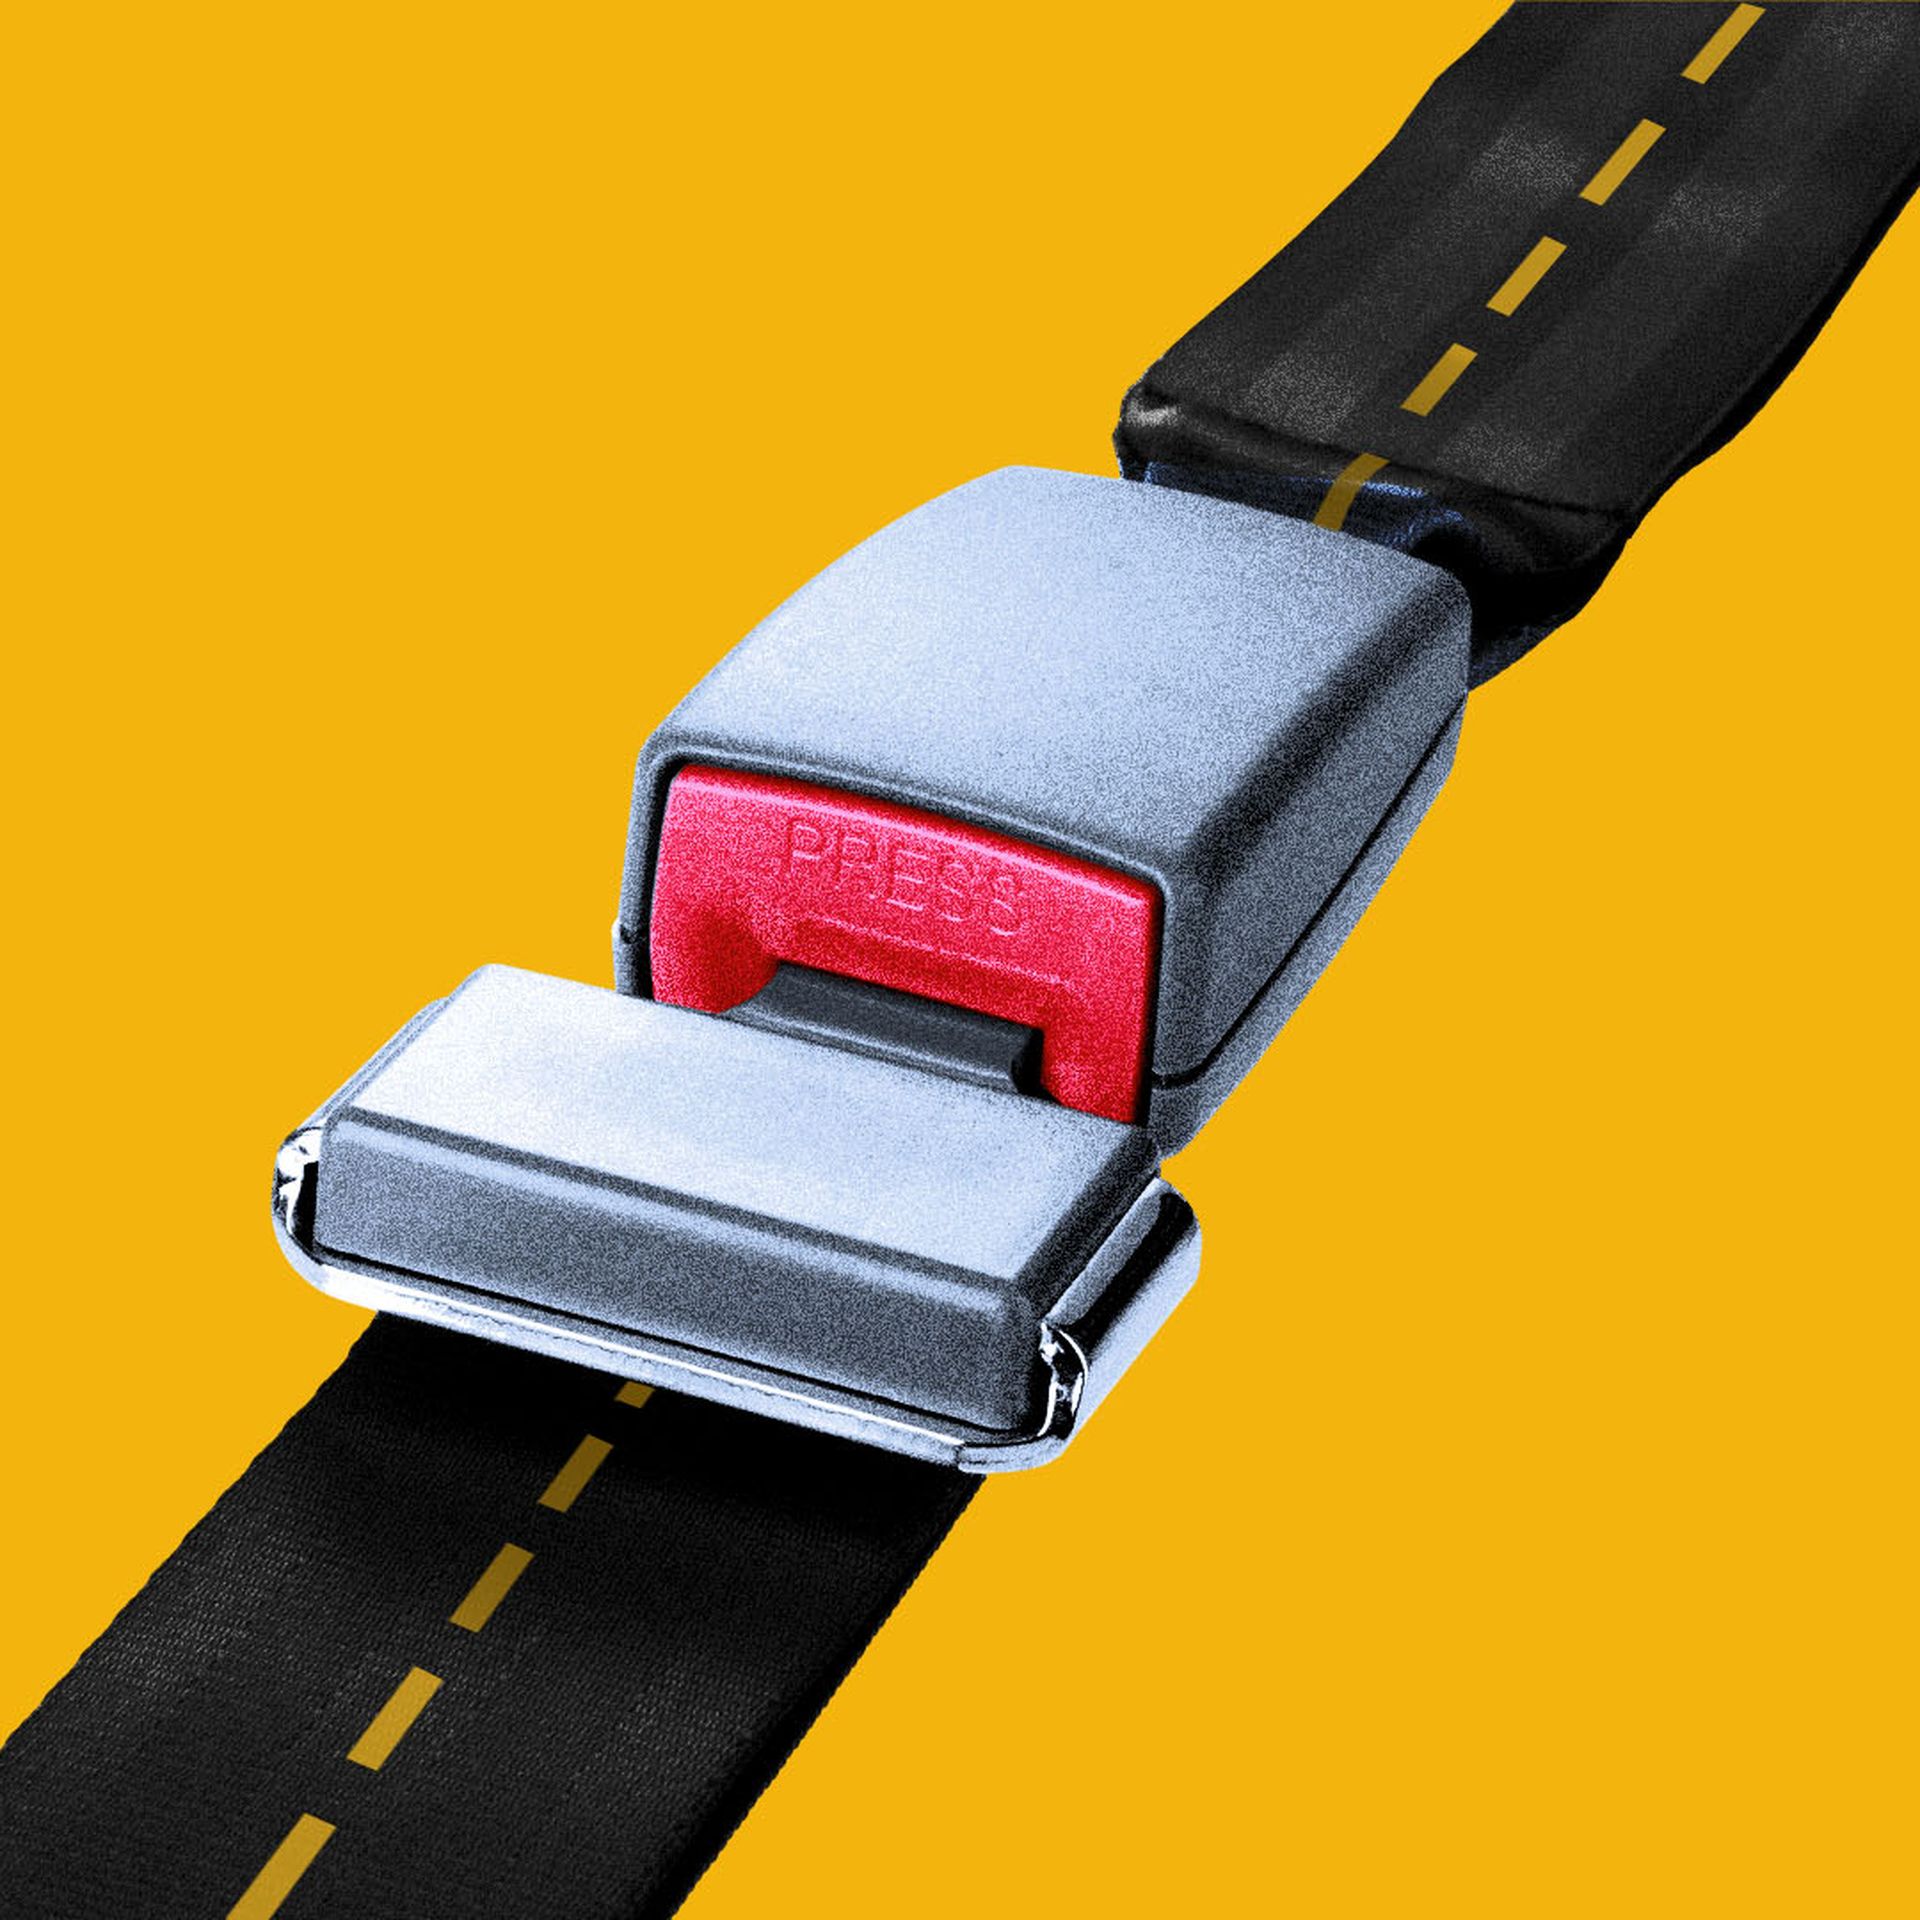 Illustration of a seat belt with a yellow road markings